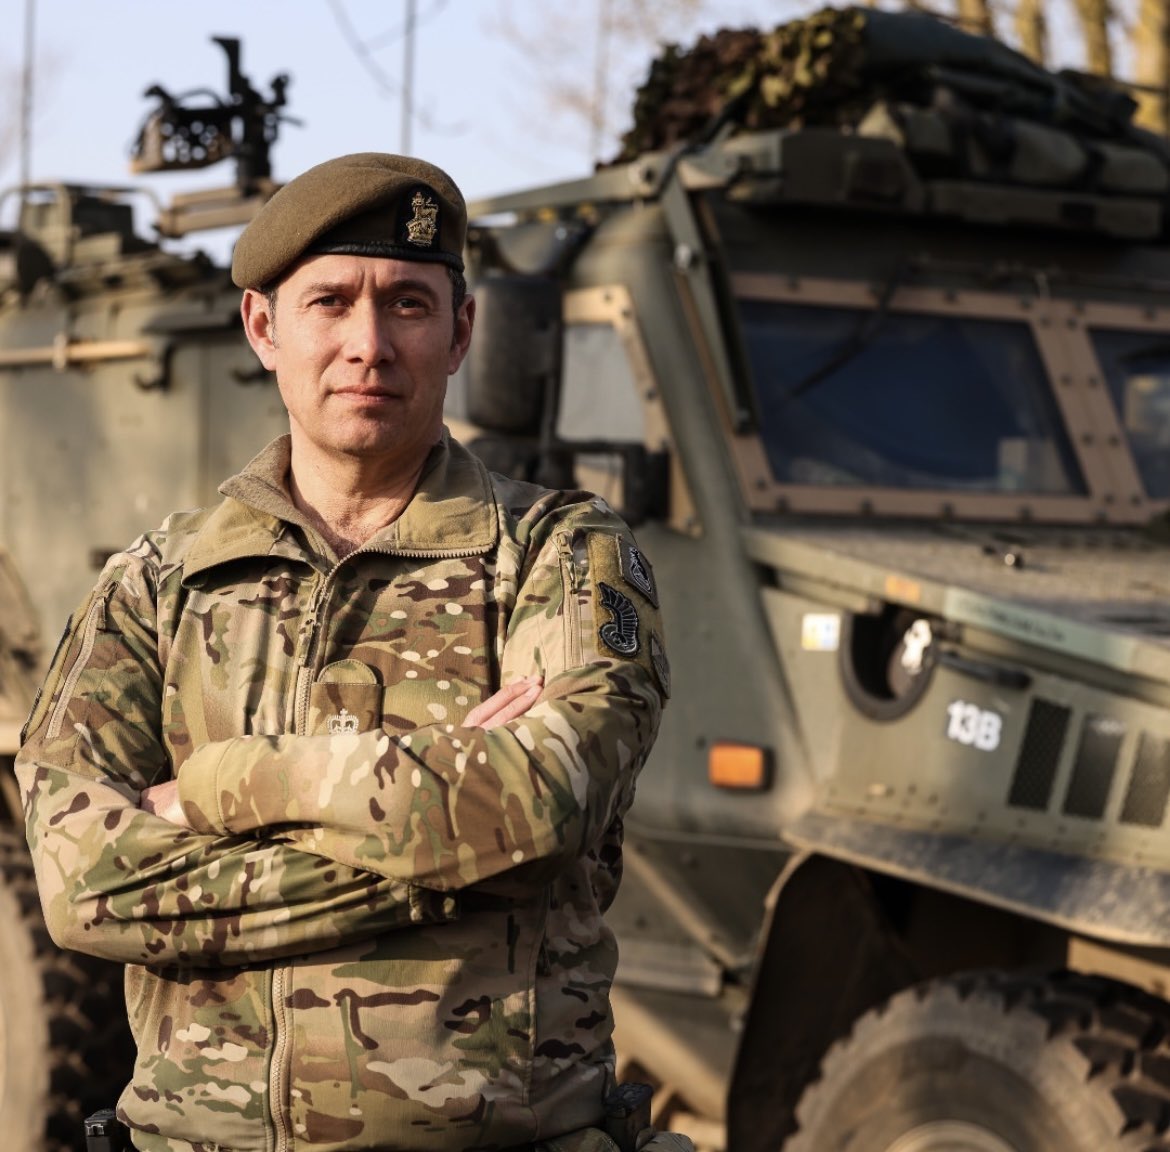 All nations of the Very high-readiness Joint Task Force (Land) came together to demonstrate to the residents of neighbouring towns the vehicles, equipment and personnel that stand ready to defend #NATO. They are currently being led by Brigadier Guy Foden, who has served in both…